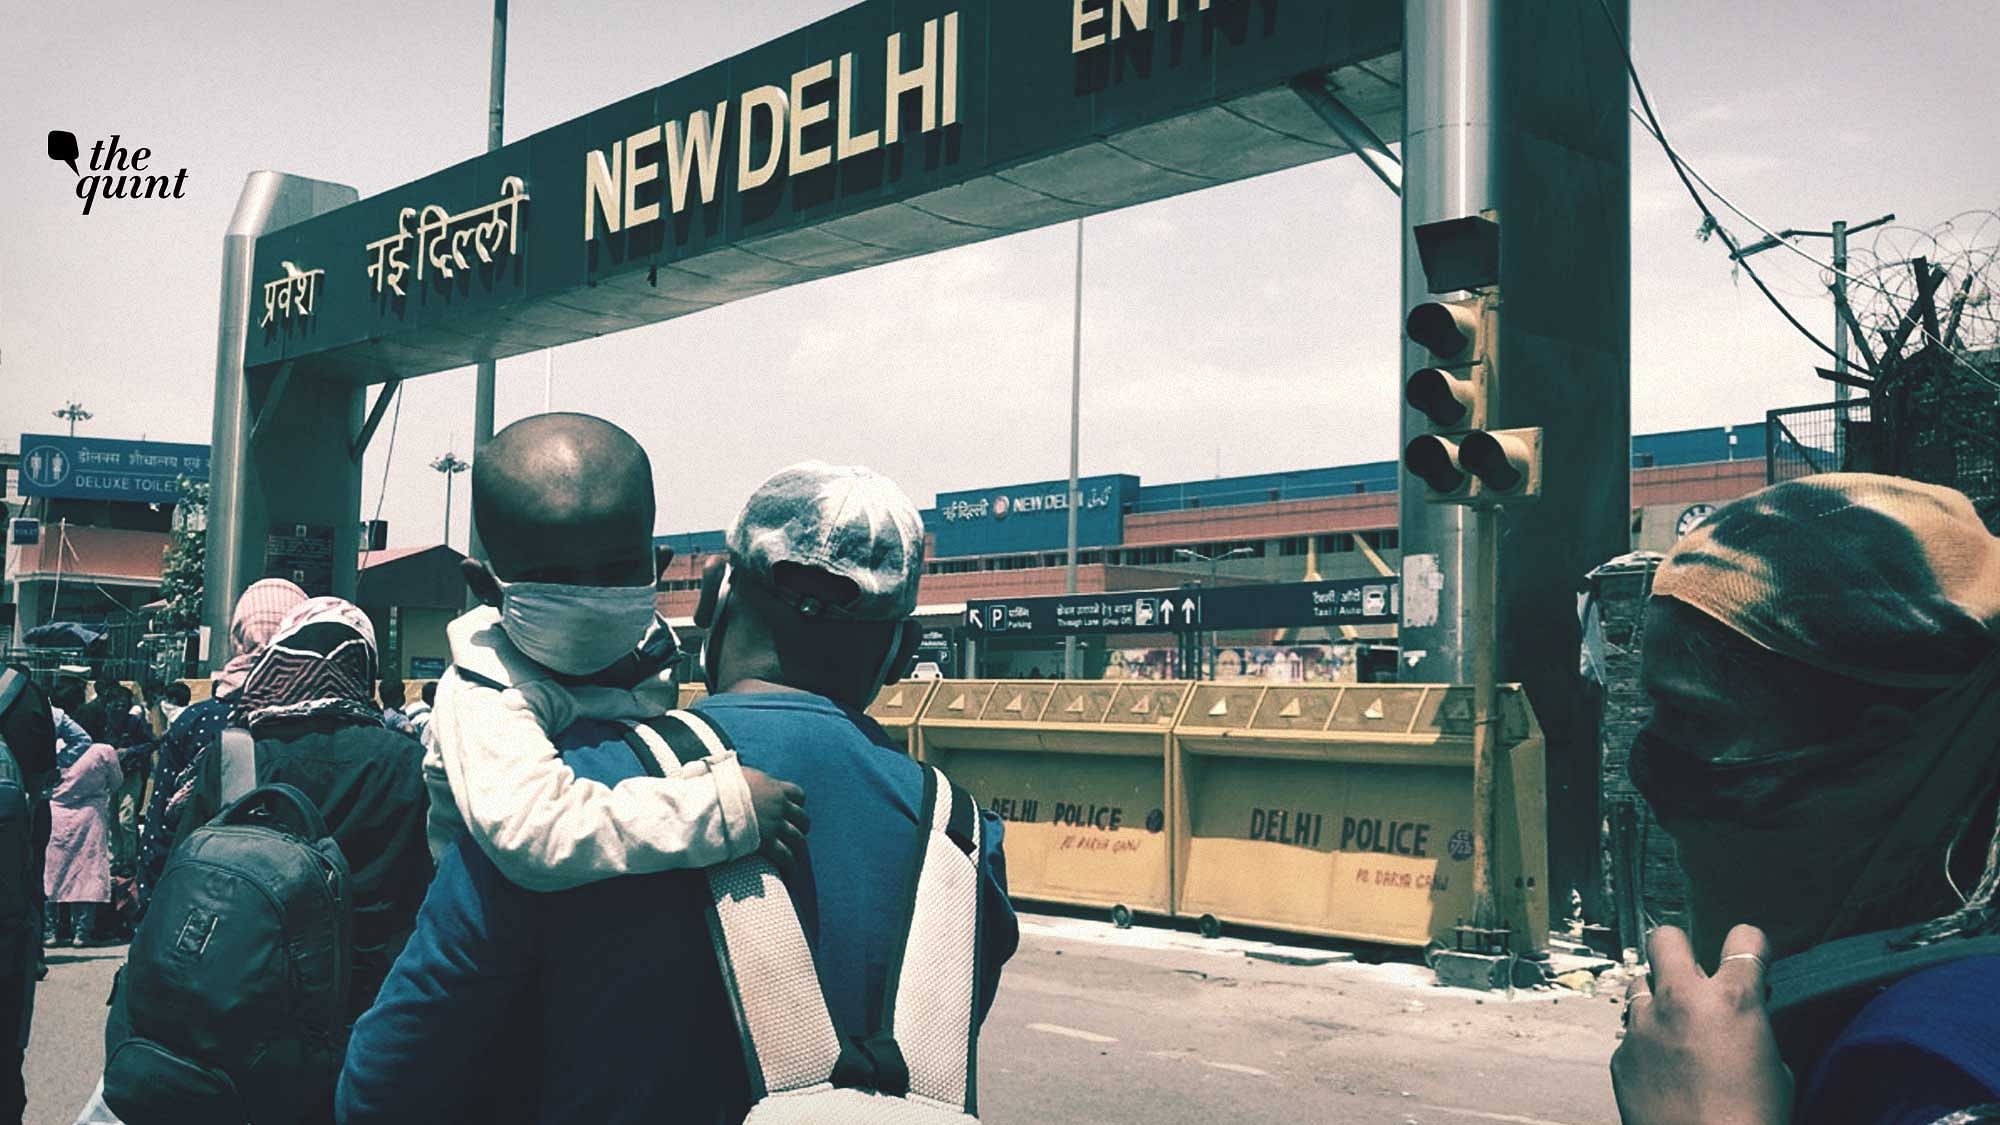 Thousands of people at New Delhi Railway Station to go back home.